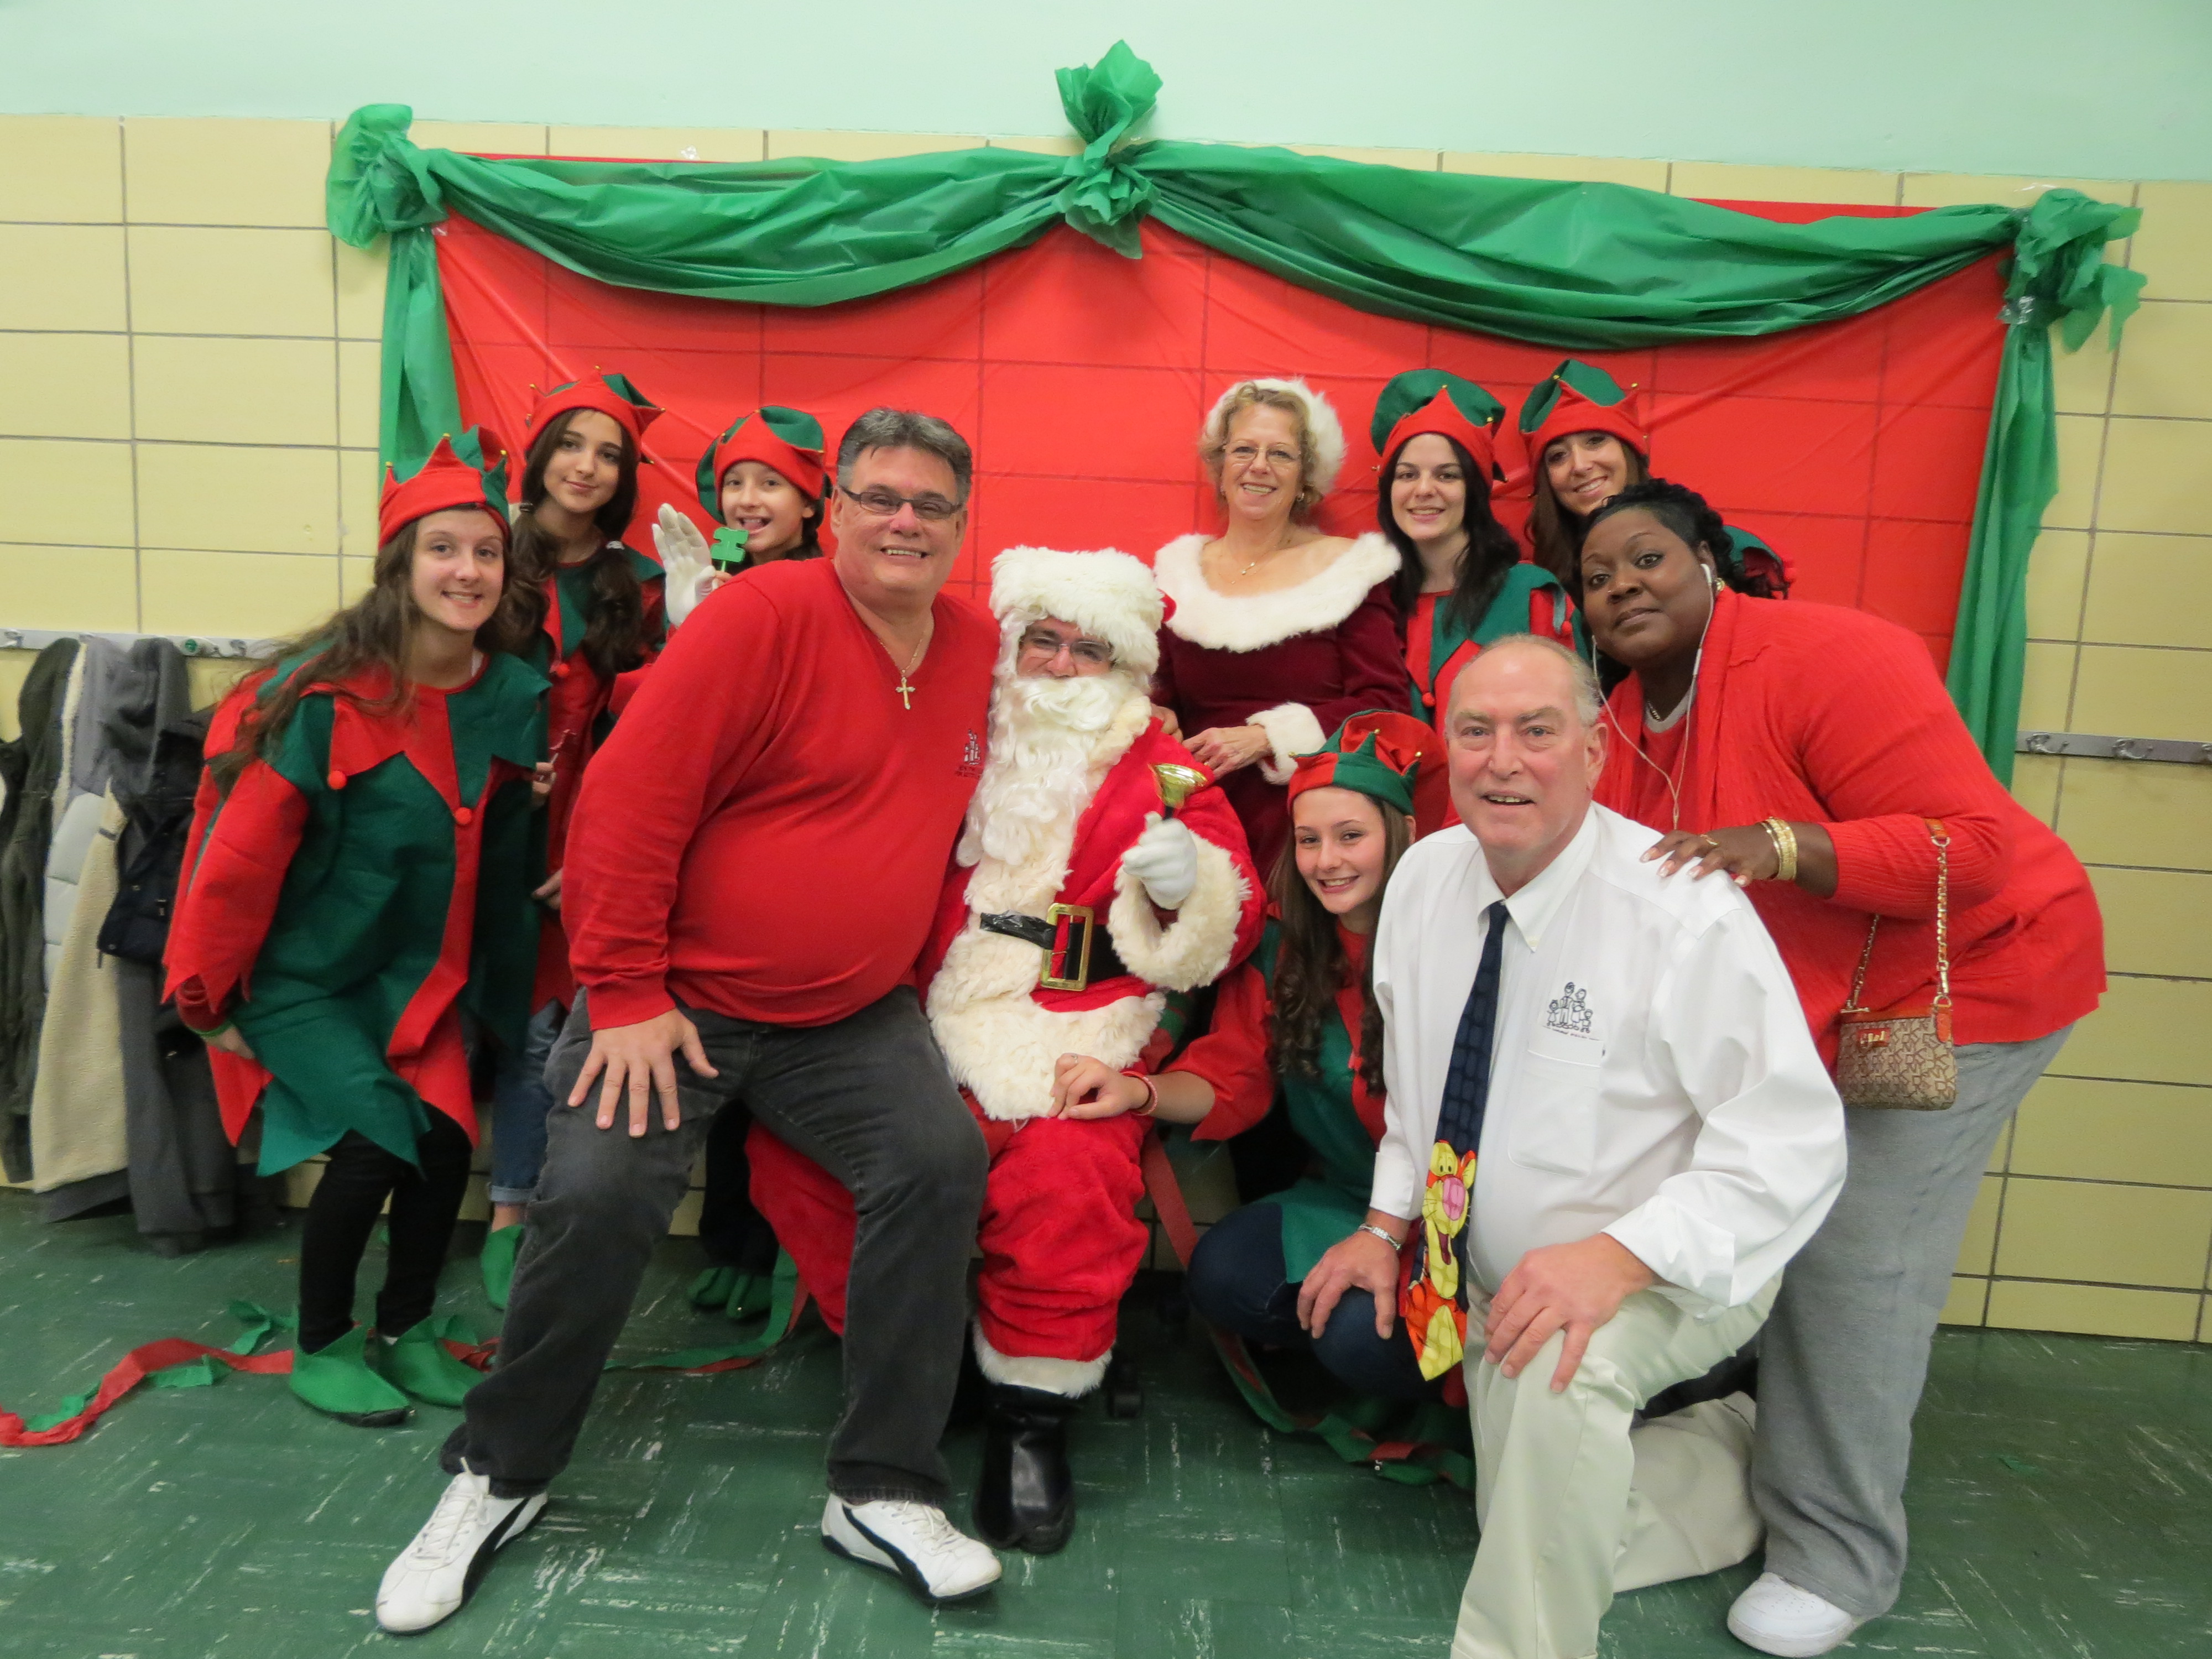 NYFAC President Andrew Baumann, front left, NYFAC Program Director Leo Compton, front right, and other revelers ring in the holiday season with Santa.